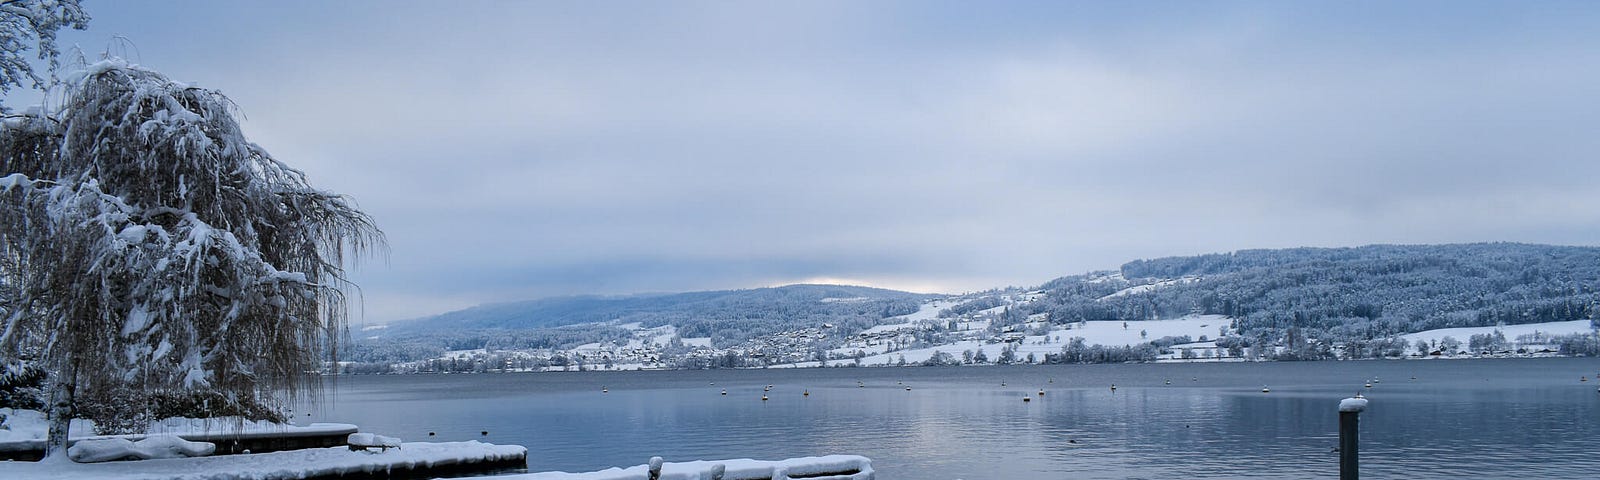 The Lake Greifensee in Zurich — rowboats covered in snow